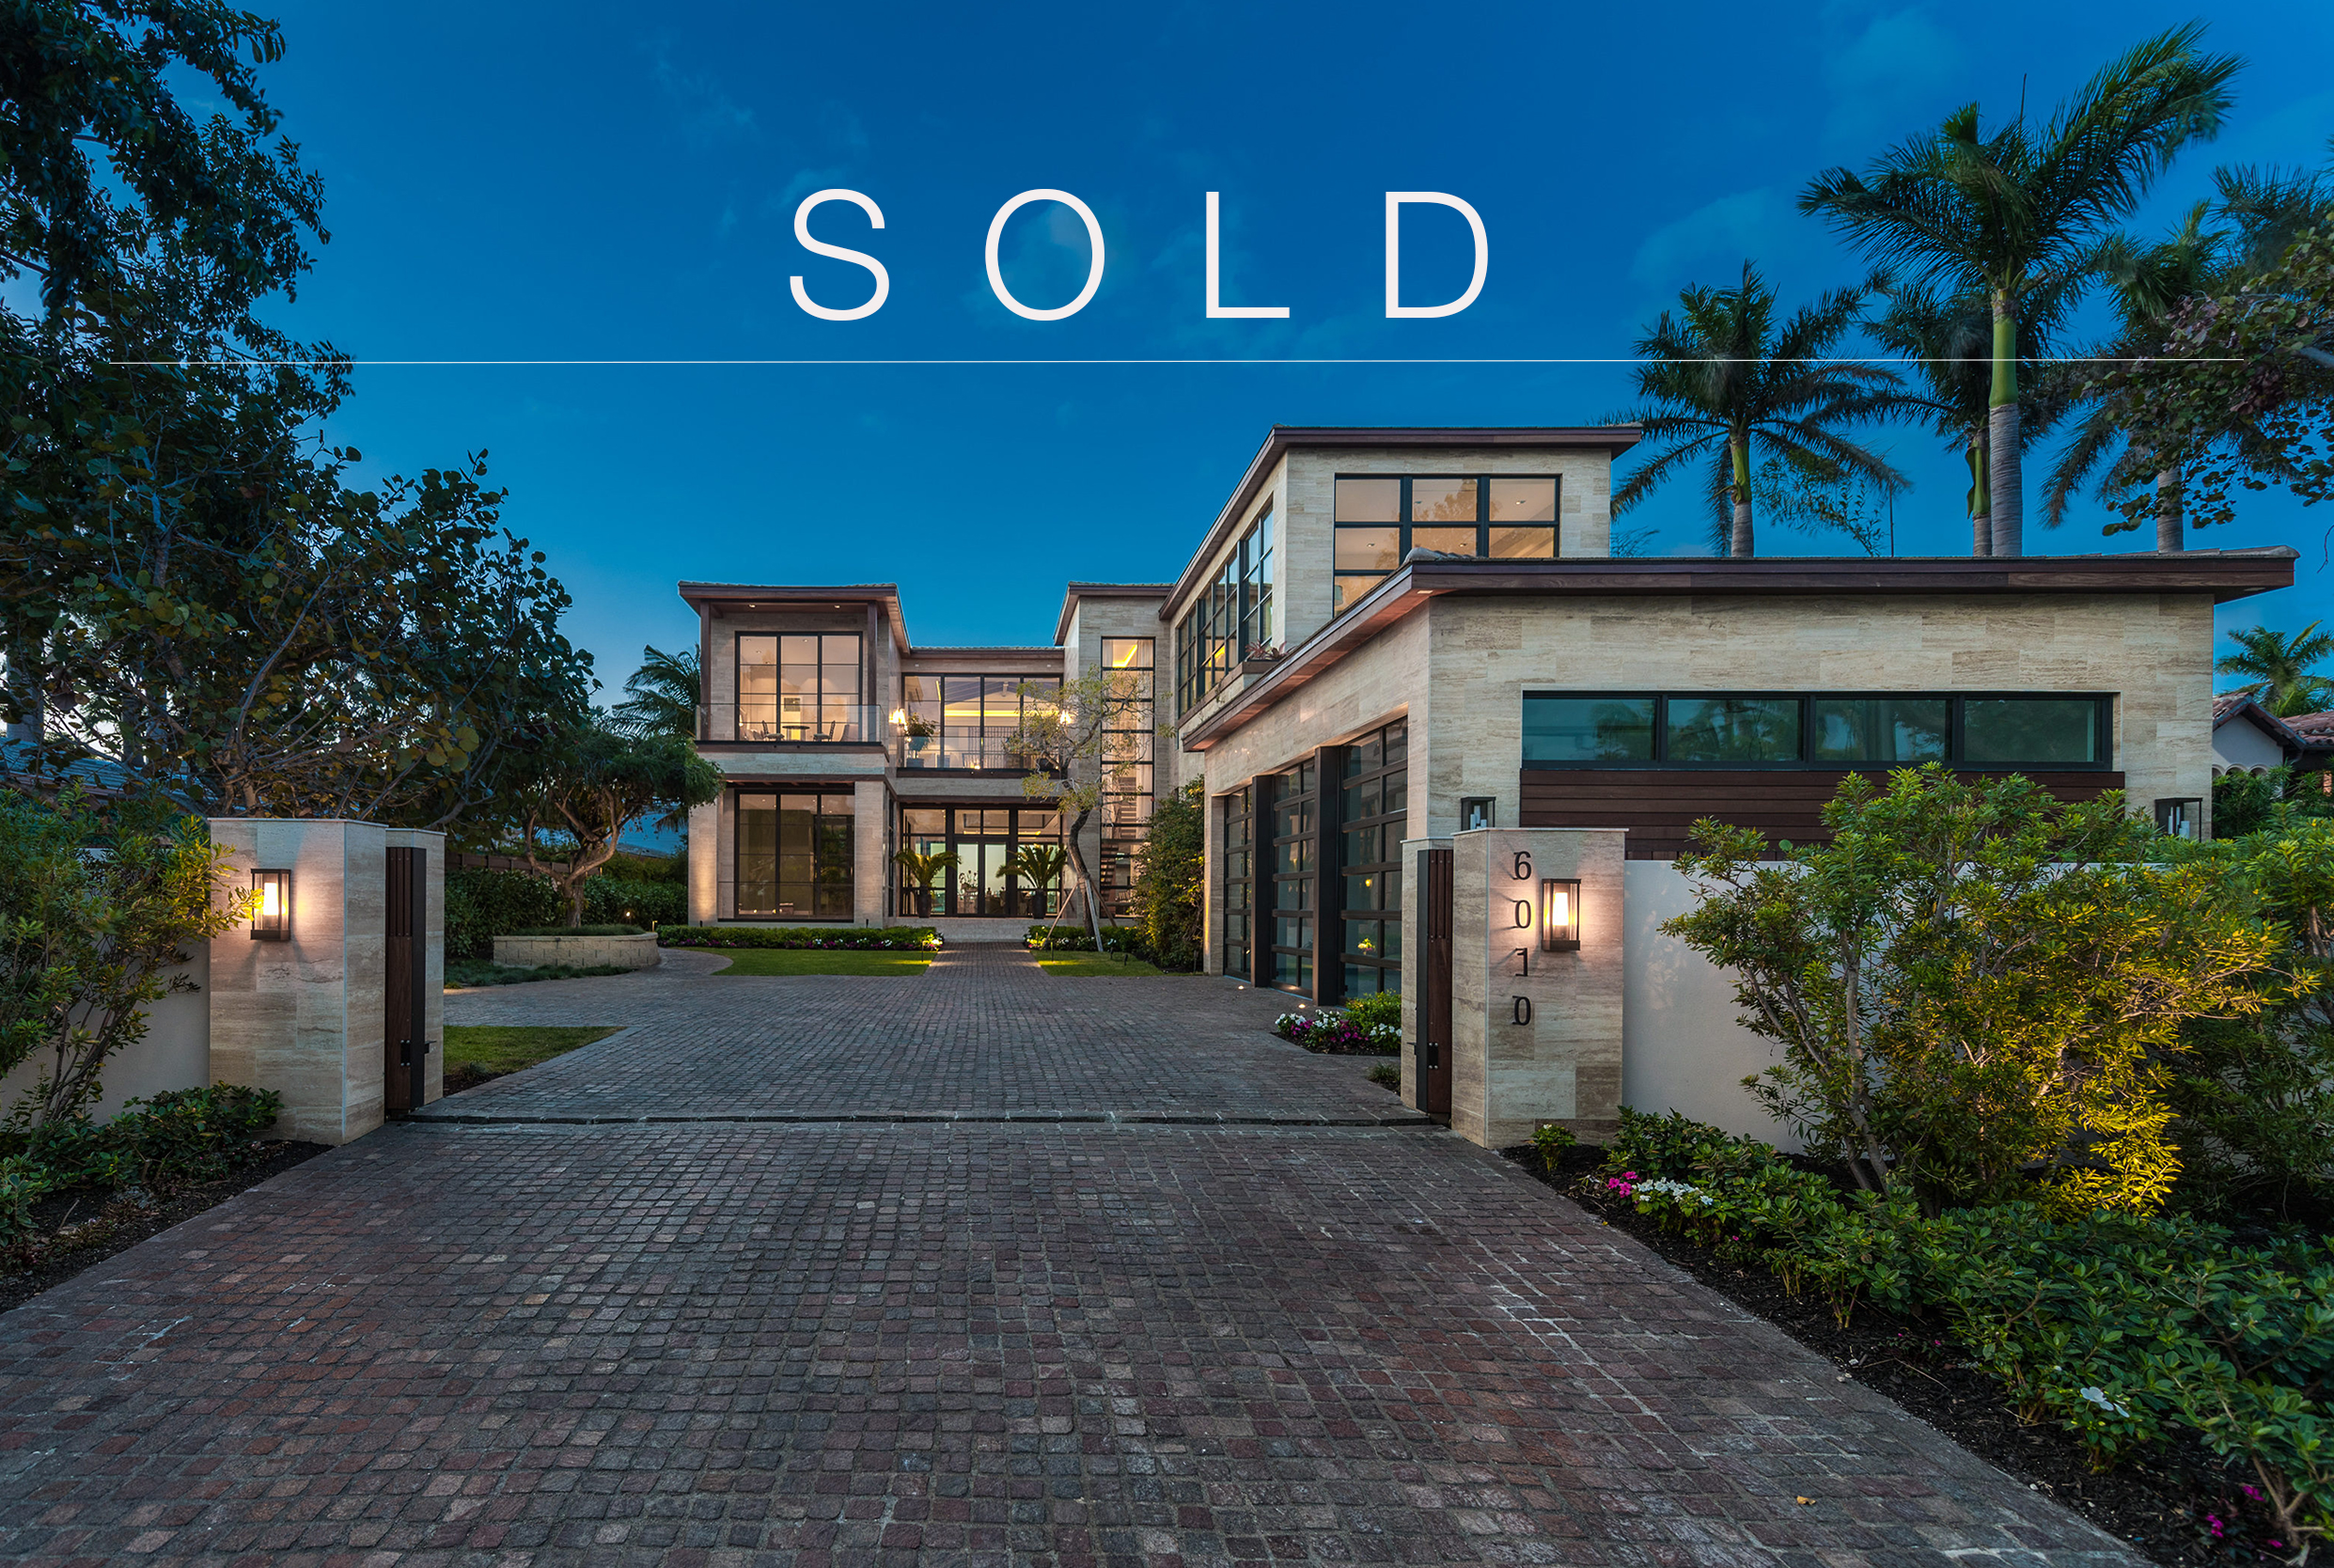 Sold Waterfront Mansion on North Bay Road by Top Realtor Nelson Gonzalez